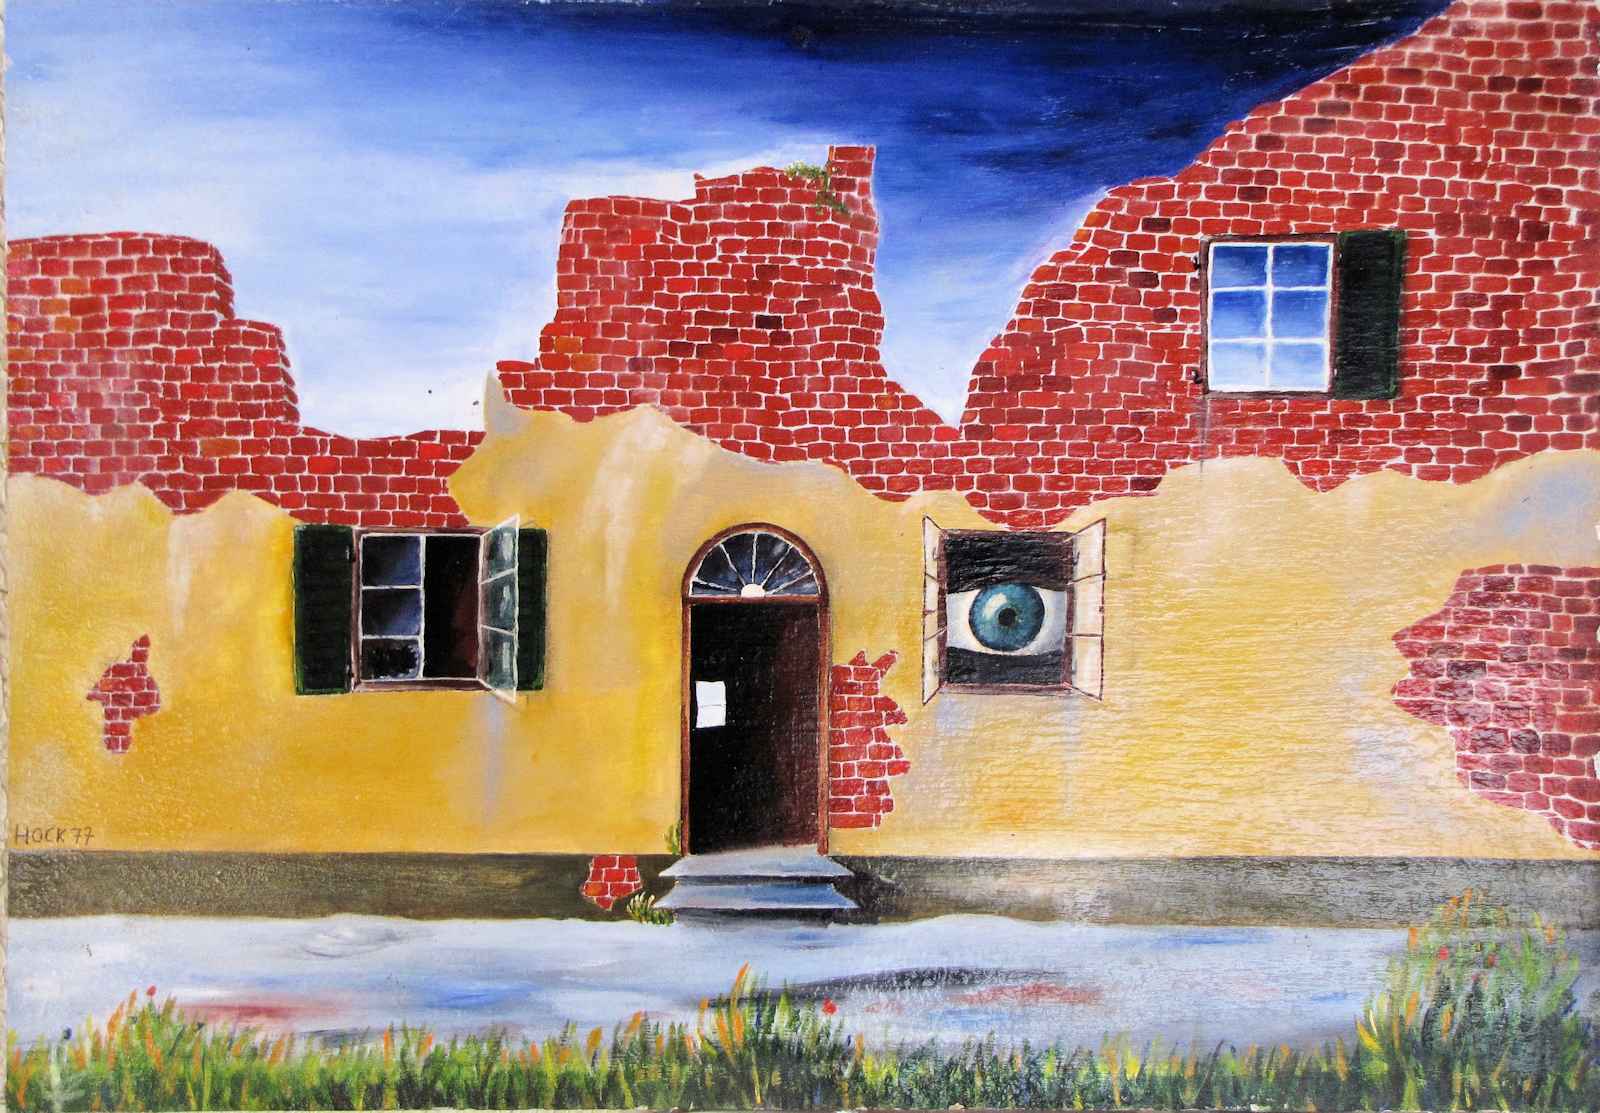 The house with eye 1977   Oil on panel 60 x 43 cm